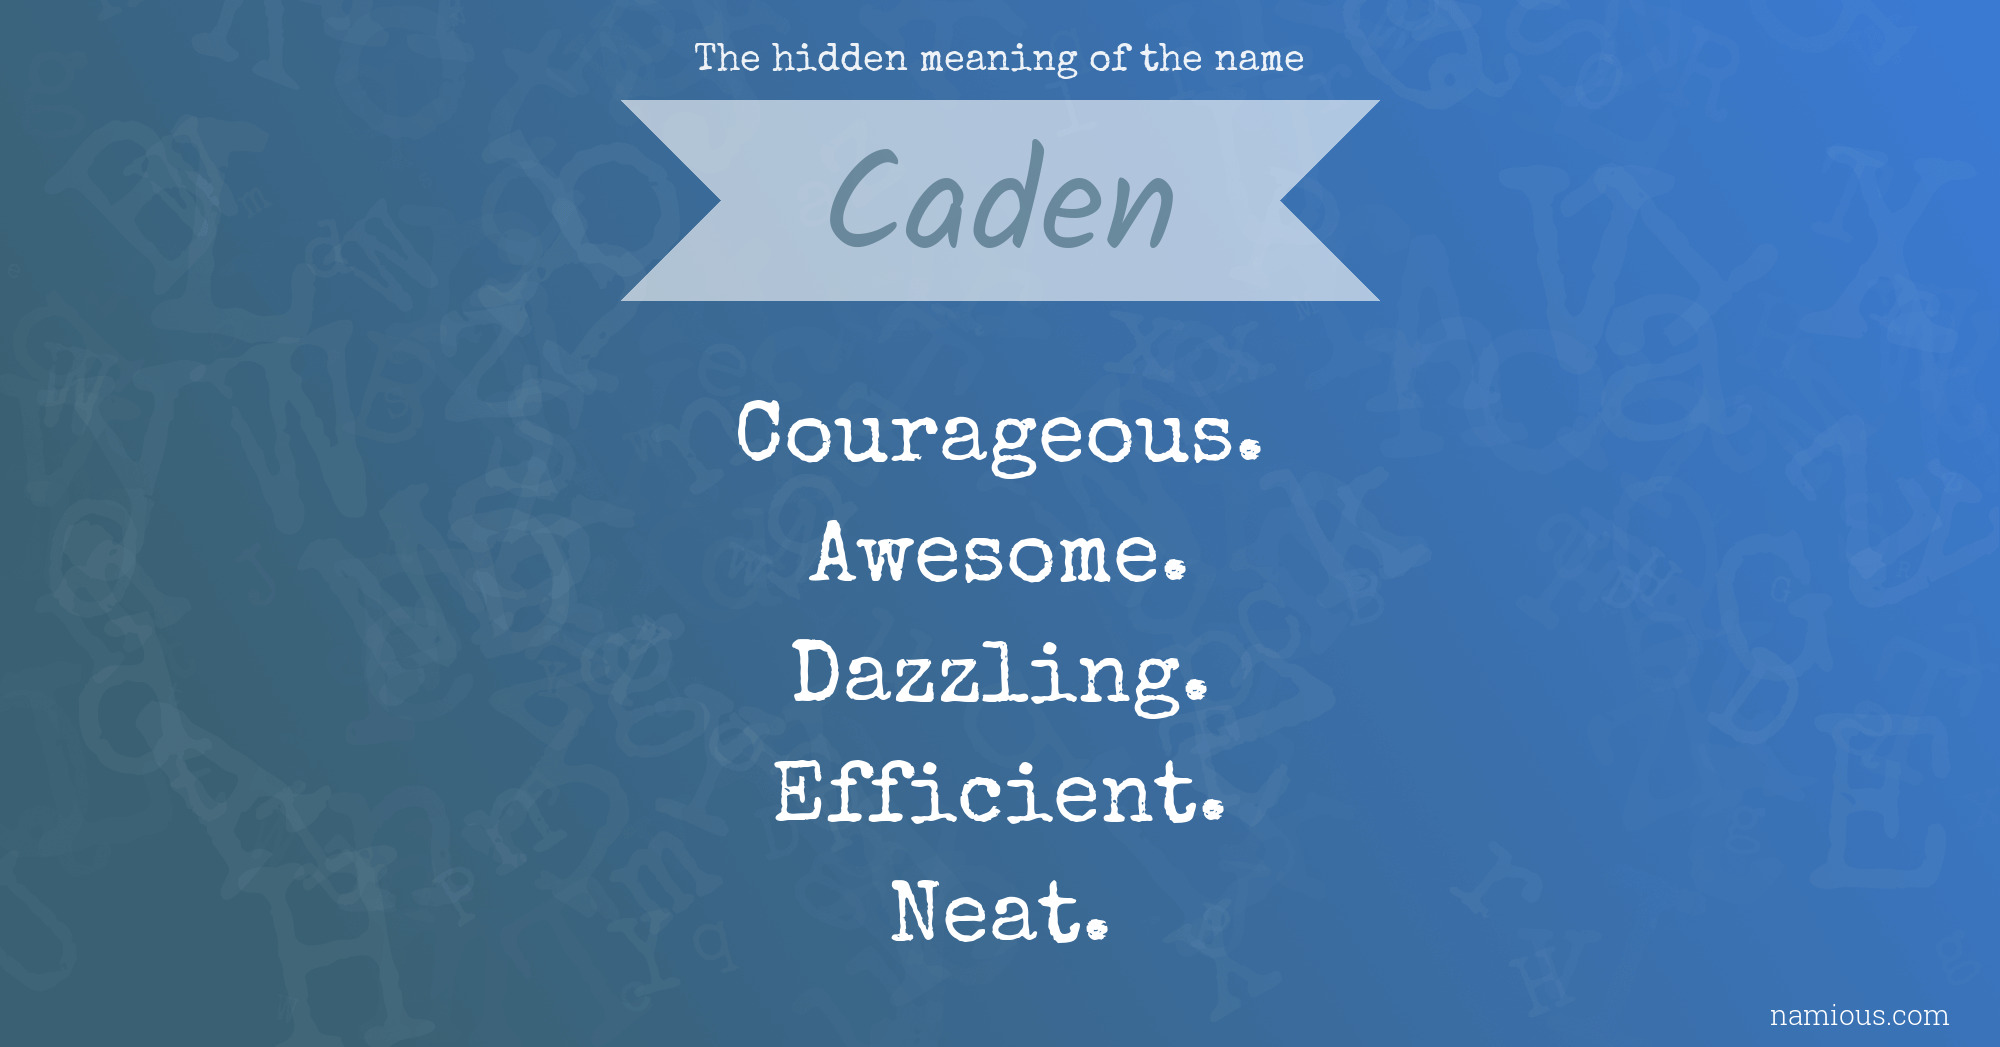 The hidden meaning of the name Caden